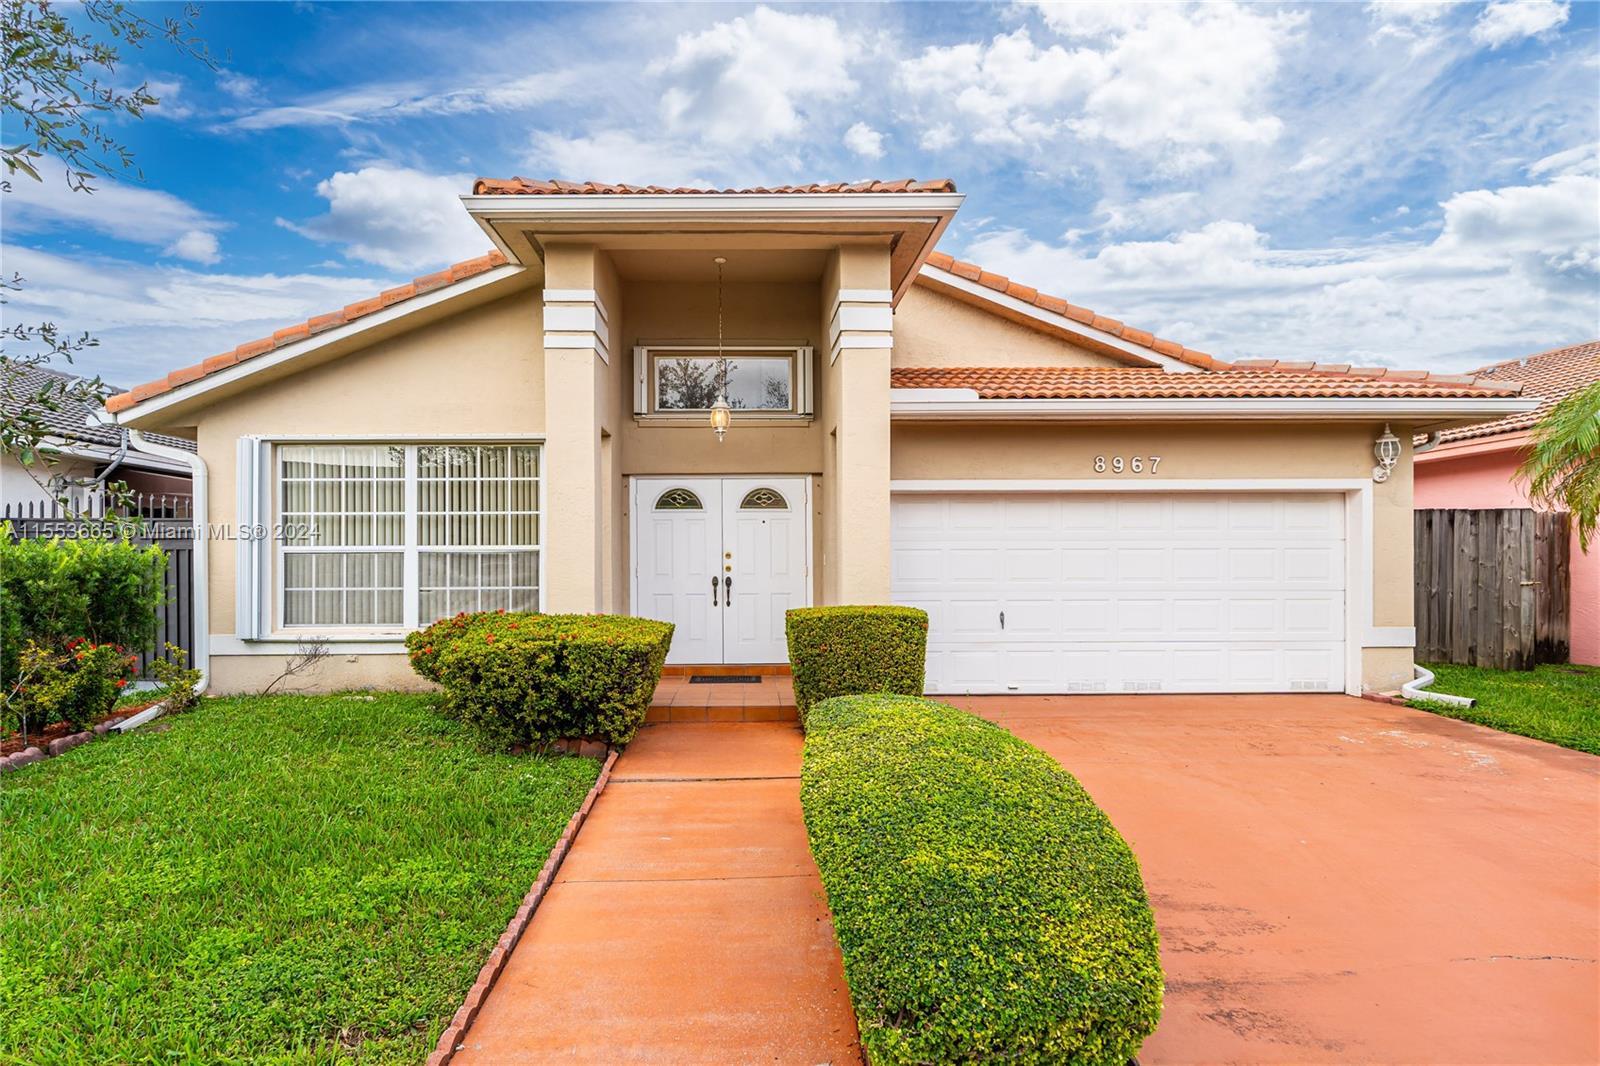 Photo of 8967 NW 146th Ter in Miami Lakes, FL